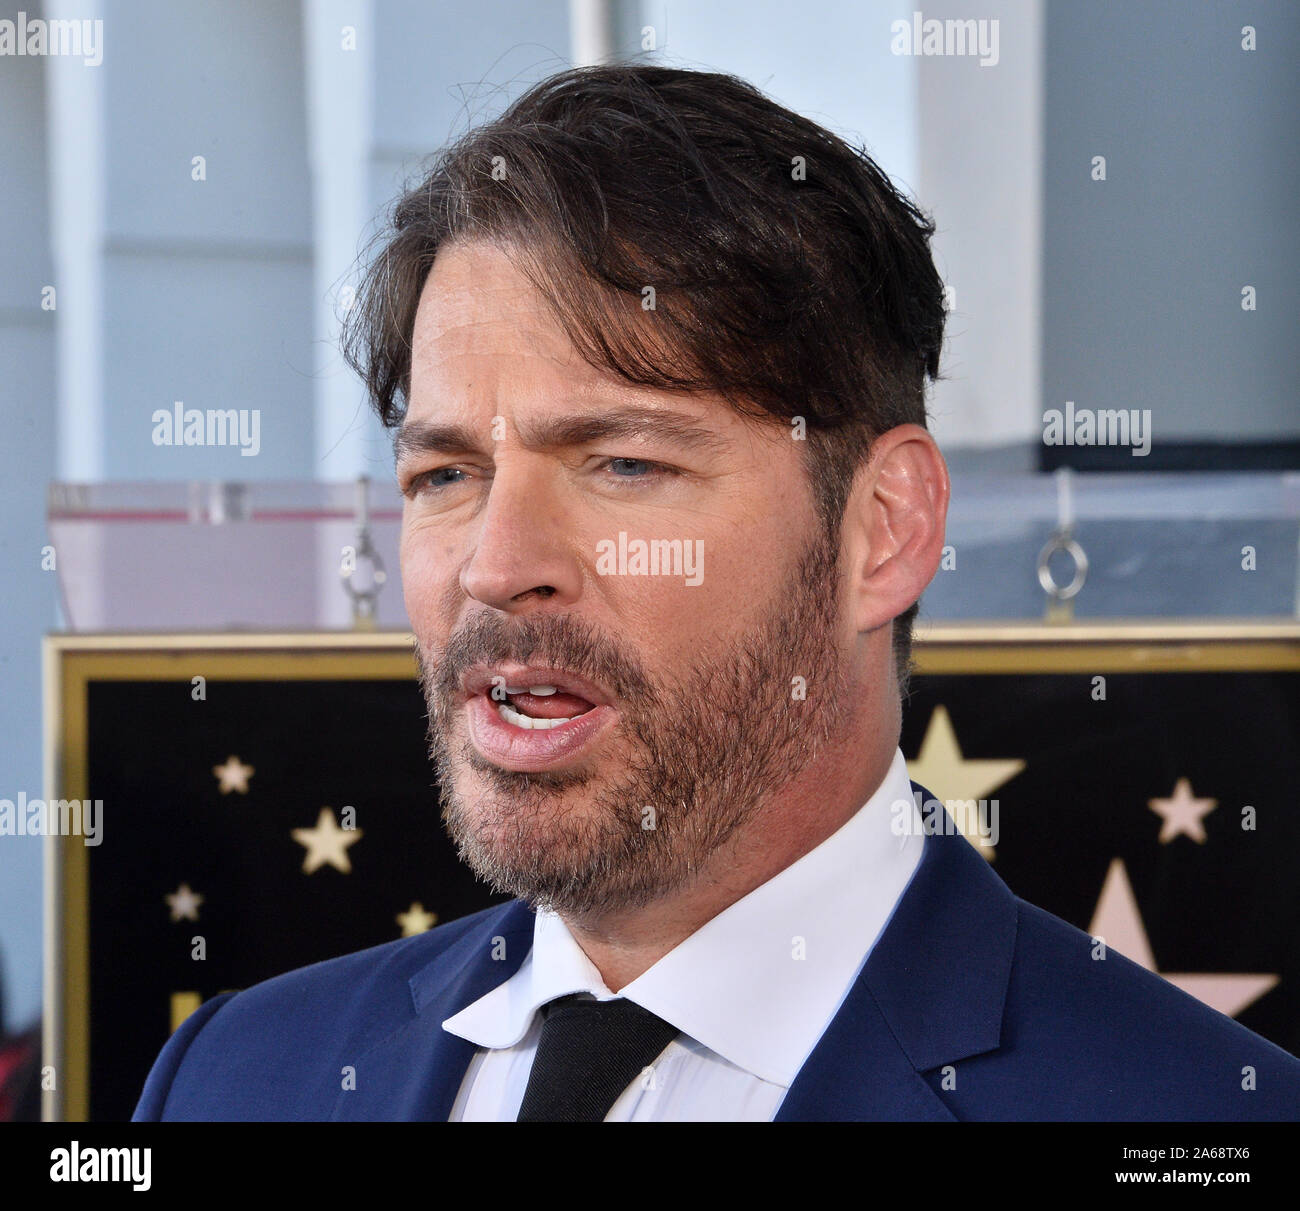 Los Angeles, United States. 24th Oct, 2019. Grammy and Emmy-award winning American singer, composer, actor, and television host Harry Connick Jr. speaks with reporters following an unveiling ceremony honoring him with the 2,678th star on the Hollywood Walk of Fame in Los Angeles on Thursday, October 24th, 2019. Connick's star is next to Cole Porter, one of his favorite songwriters. Photo by Jim Ruymen/UPI Credit: UPI/Alamy Live News Stock Photo